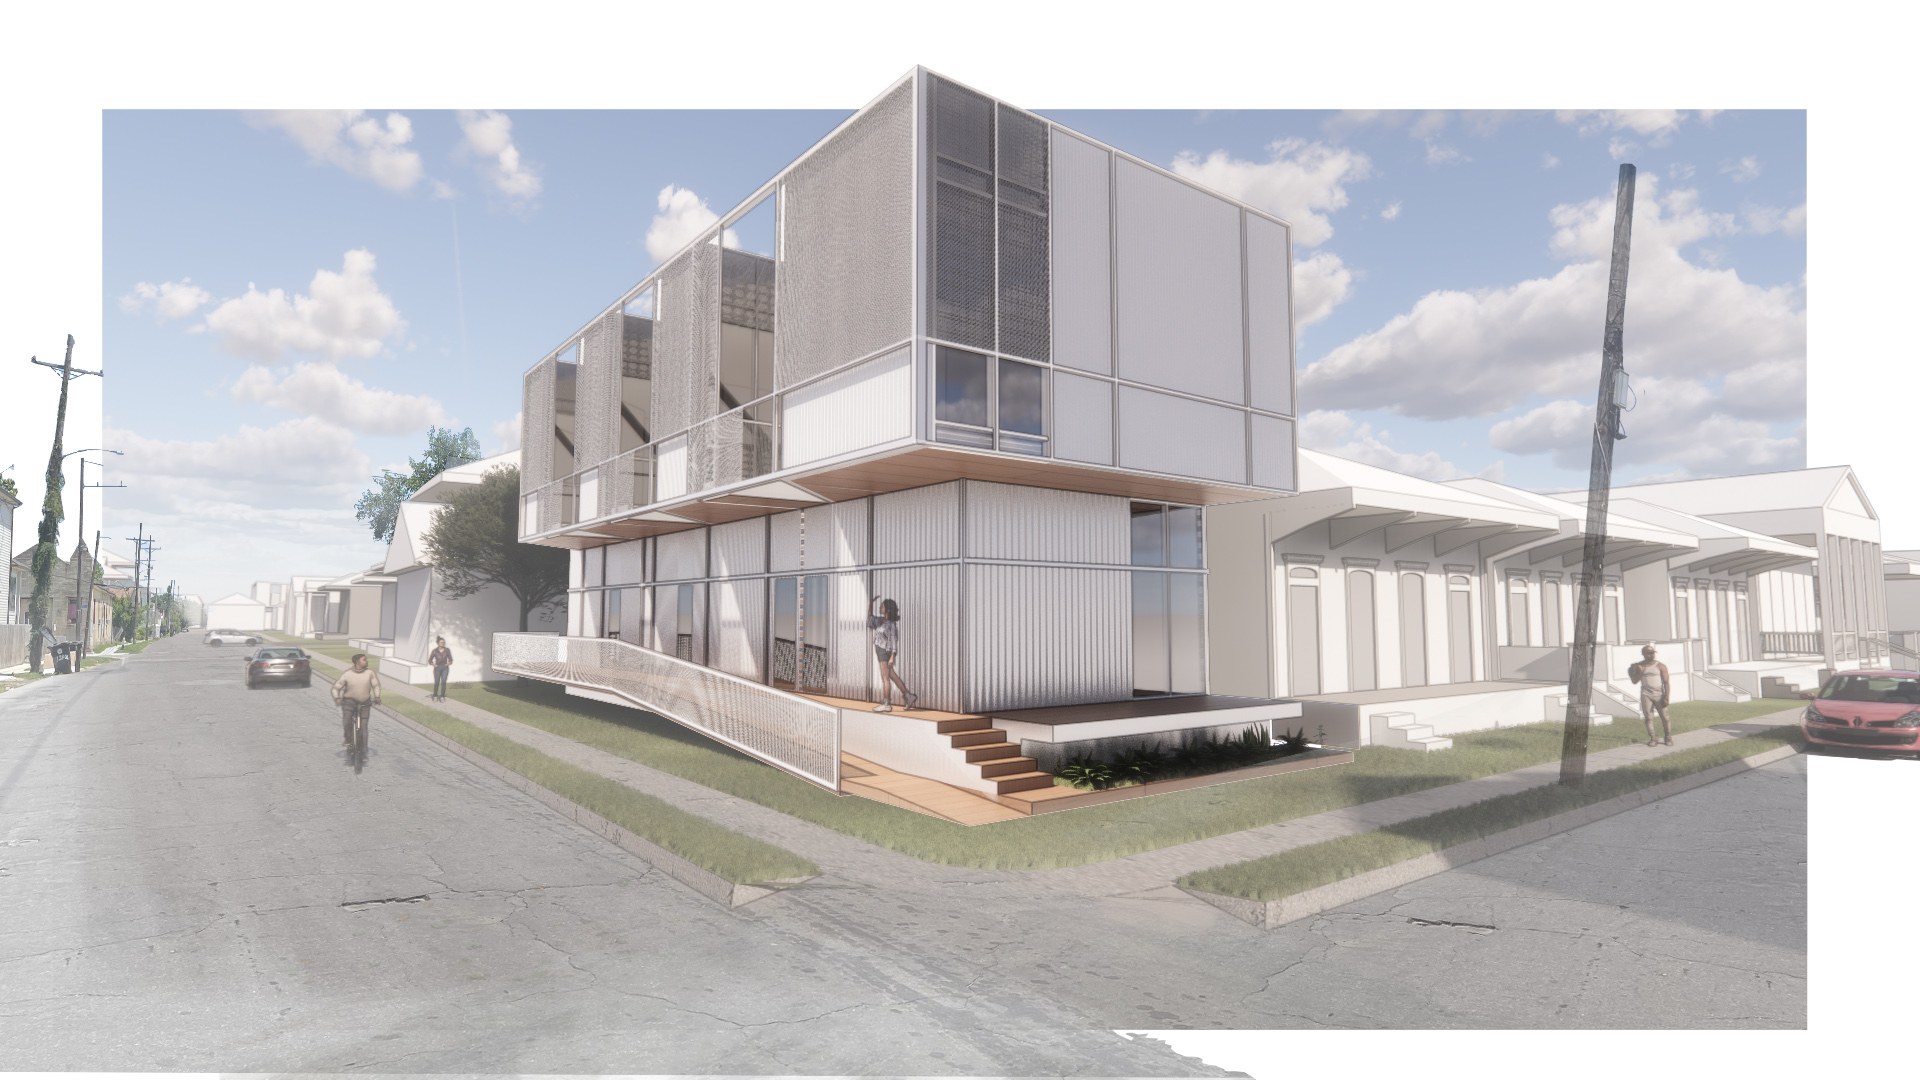 Daniel Tighe's thesis project: exterior rendering